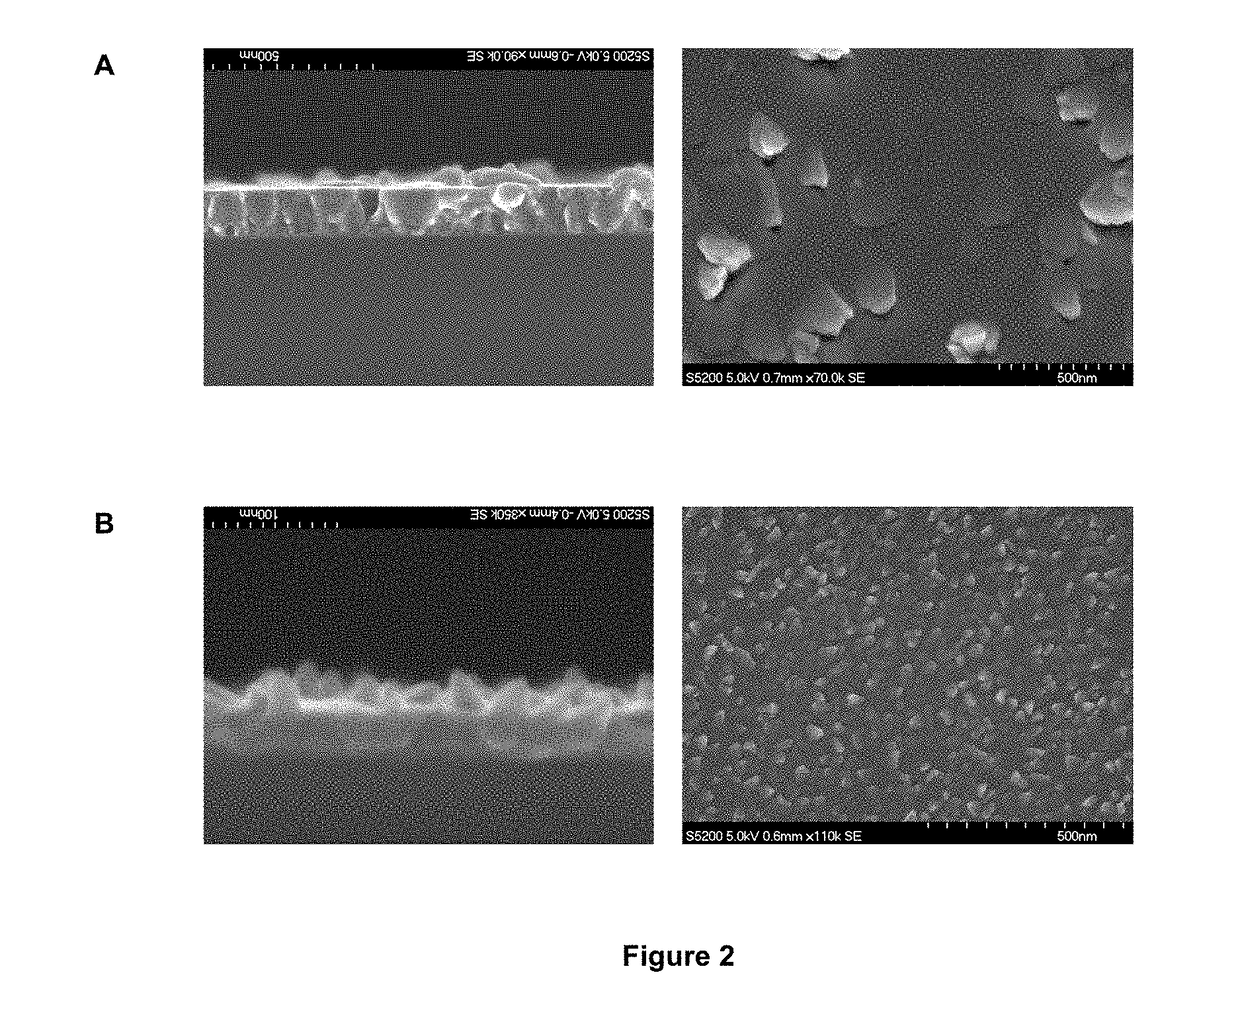 Biocompatible implants made of nanostructured titanium with antibacterial properties